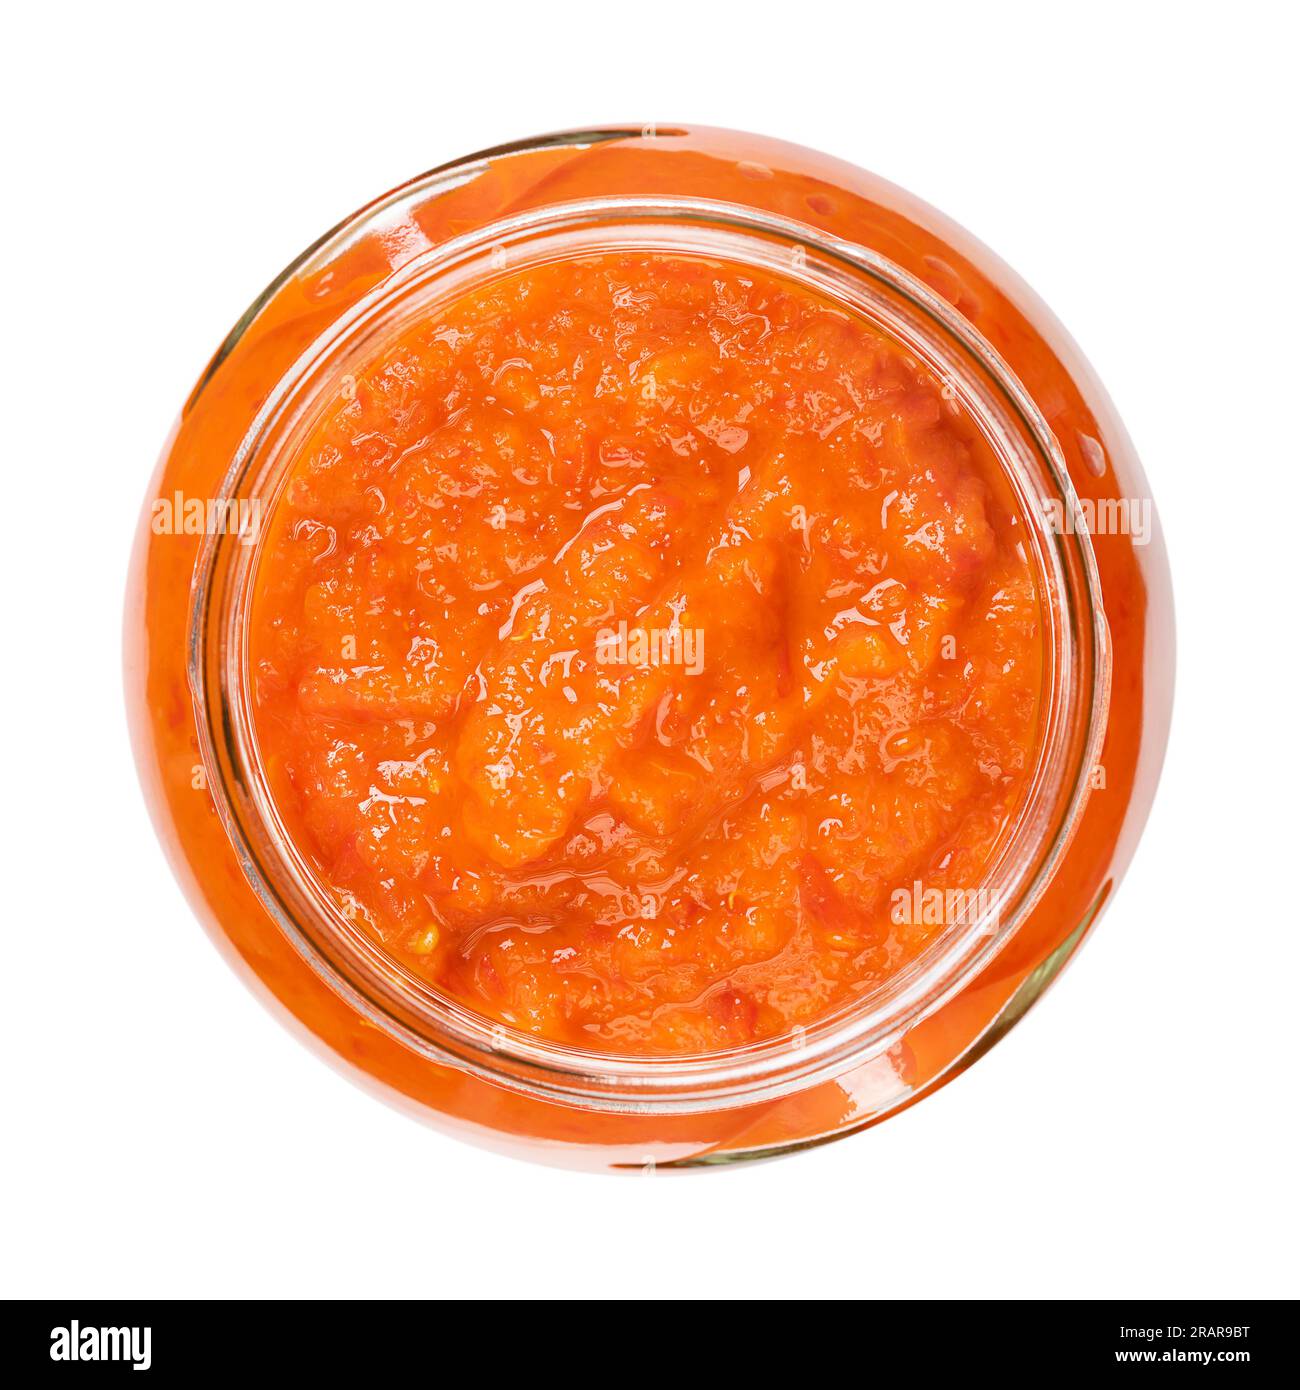 Ajvar, relish made of roasted sweet bell peppers, in a glass jar. Condiment, bread spread and side dish, popular in the Balkans. Stock Photo